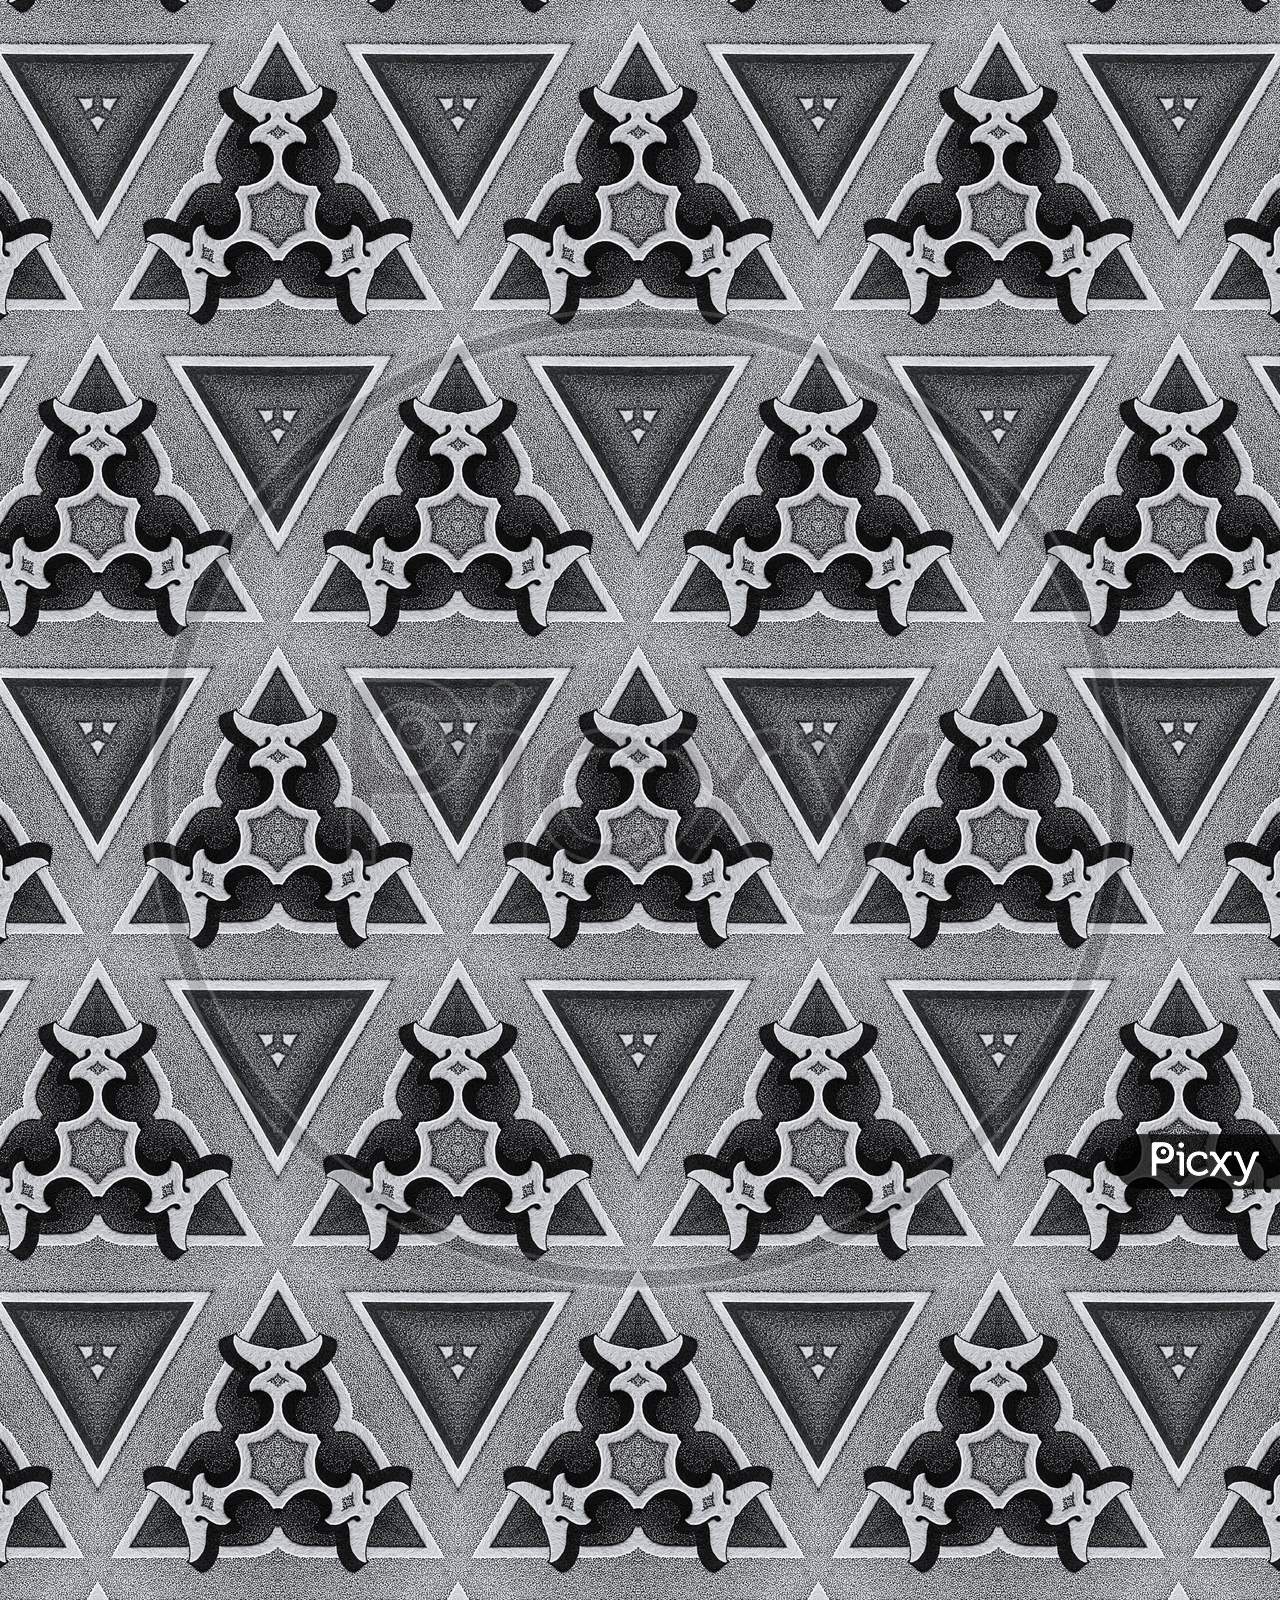 Elegant And Ornamental Dark Grey Symmetrical Designs On Solid Sheet Of Wallpaper Concept Of Home Decor And Interior Designing